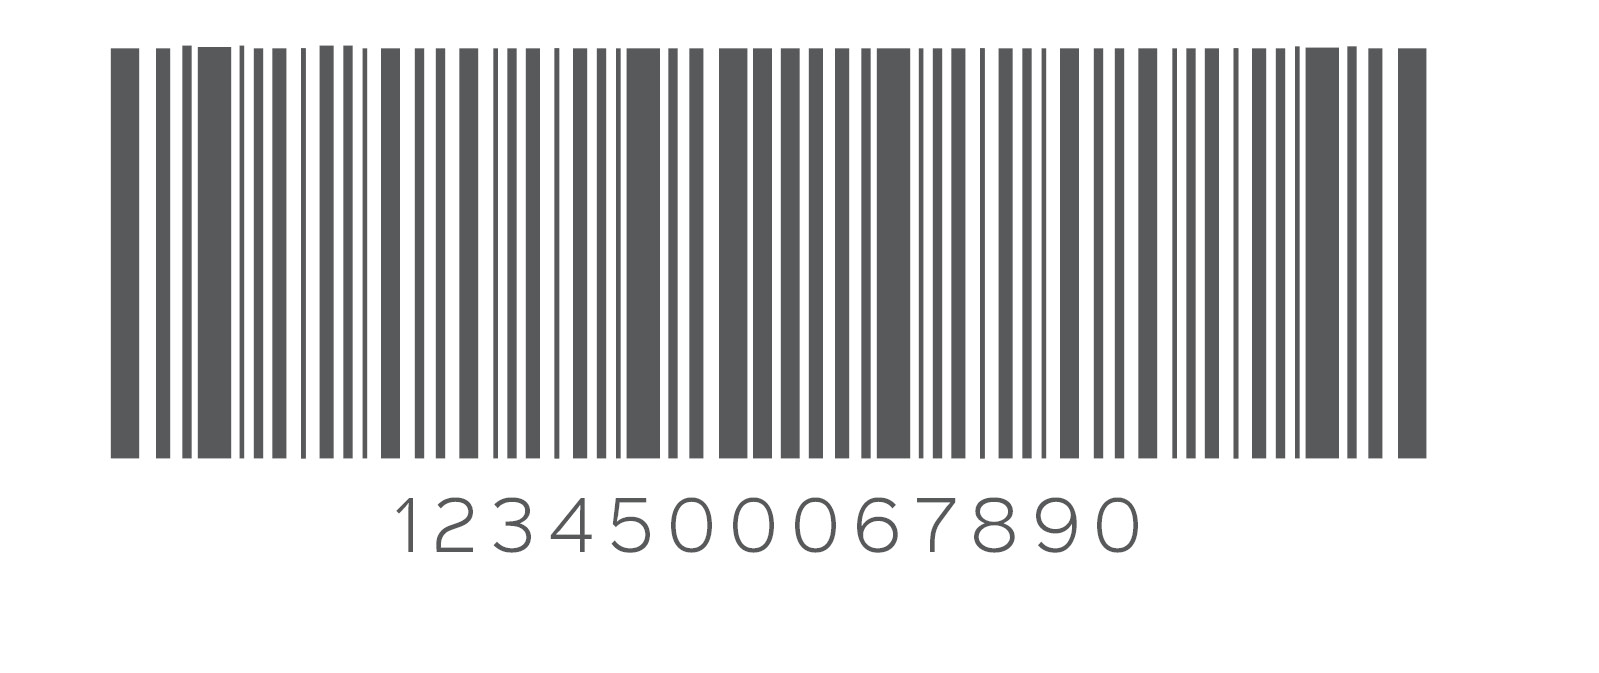 Team up with zoom Accidental Creating a Barcode Generator in App Inventor 2 - open source for you